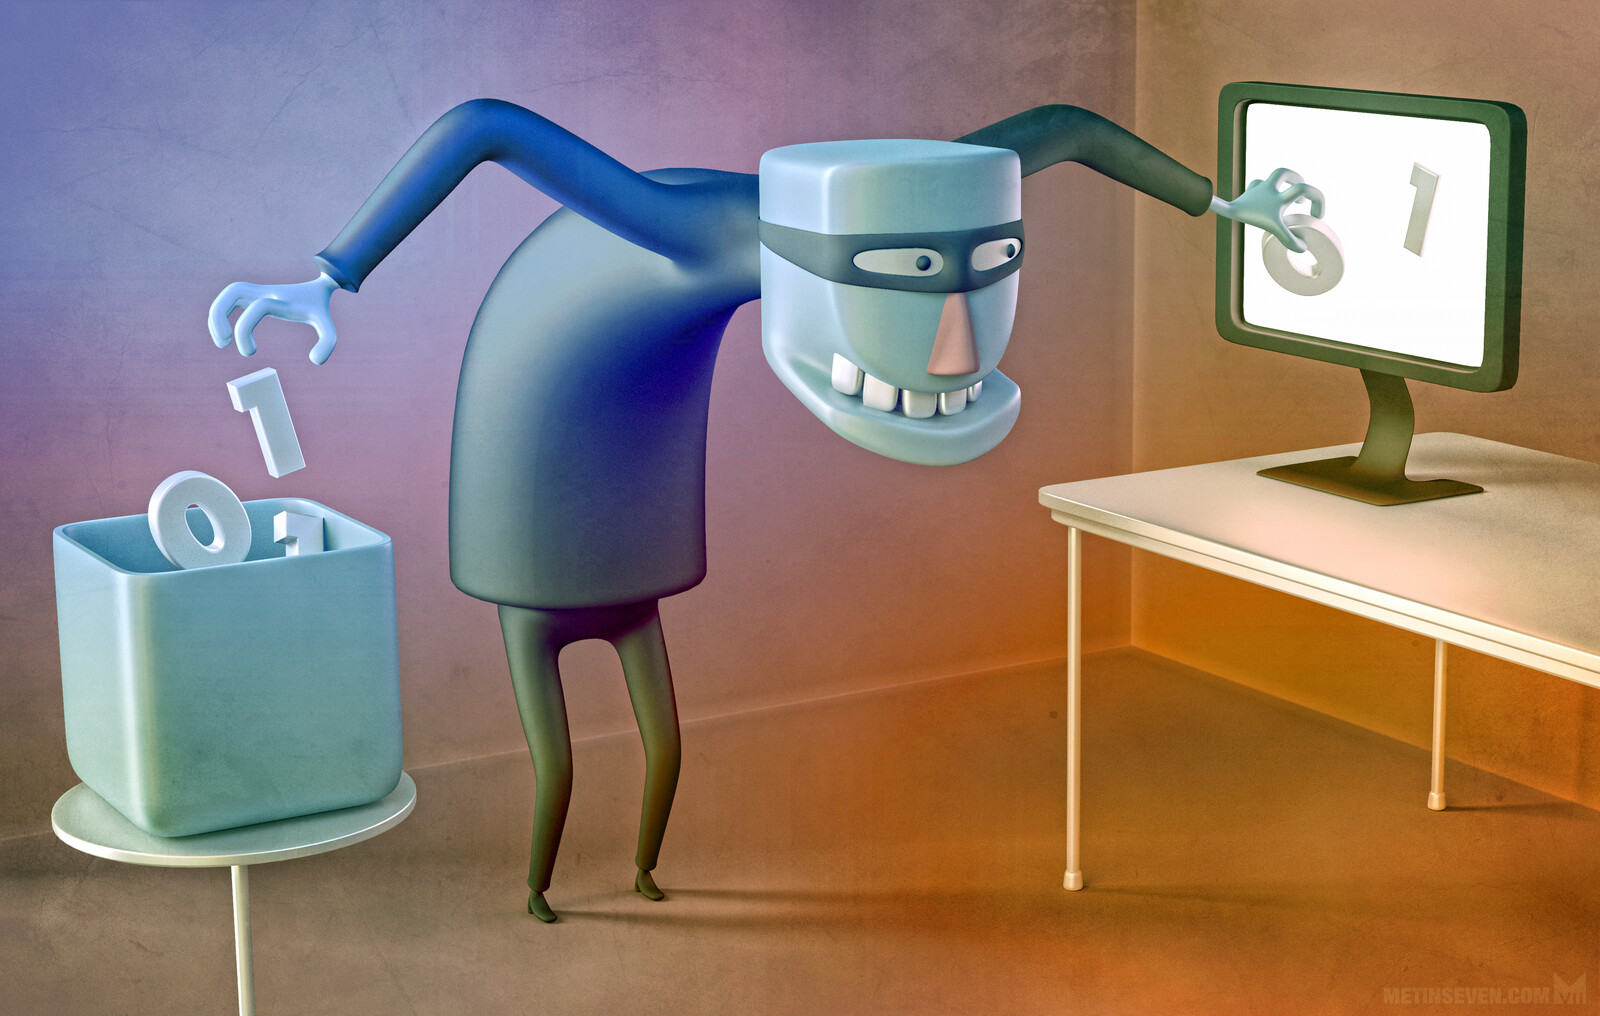 Editorial illustration about digital data theft